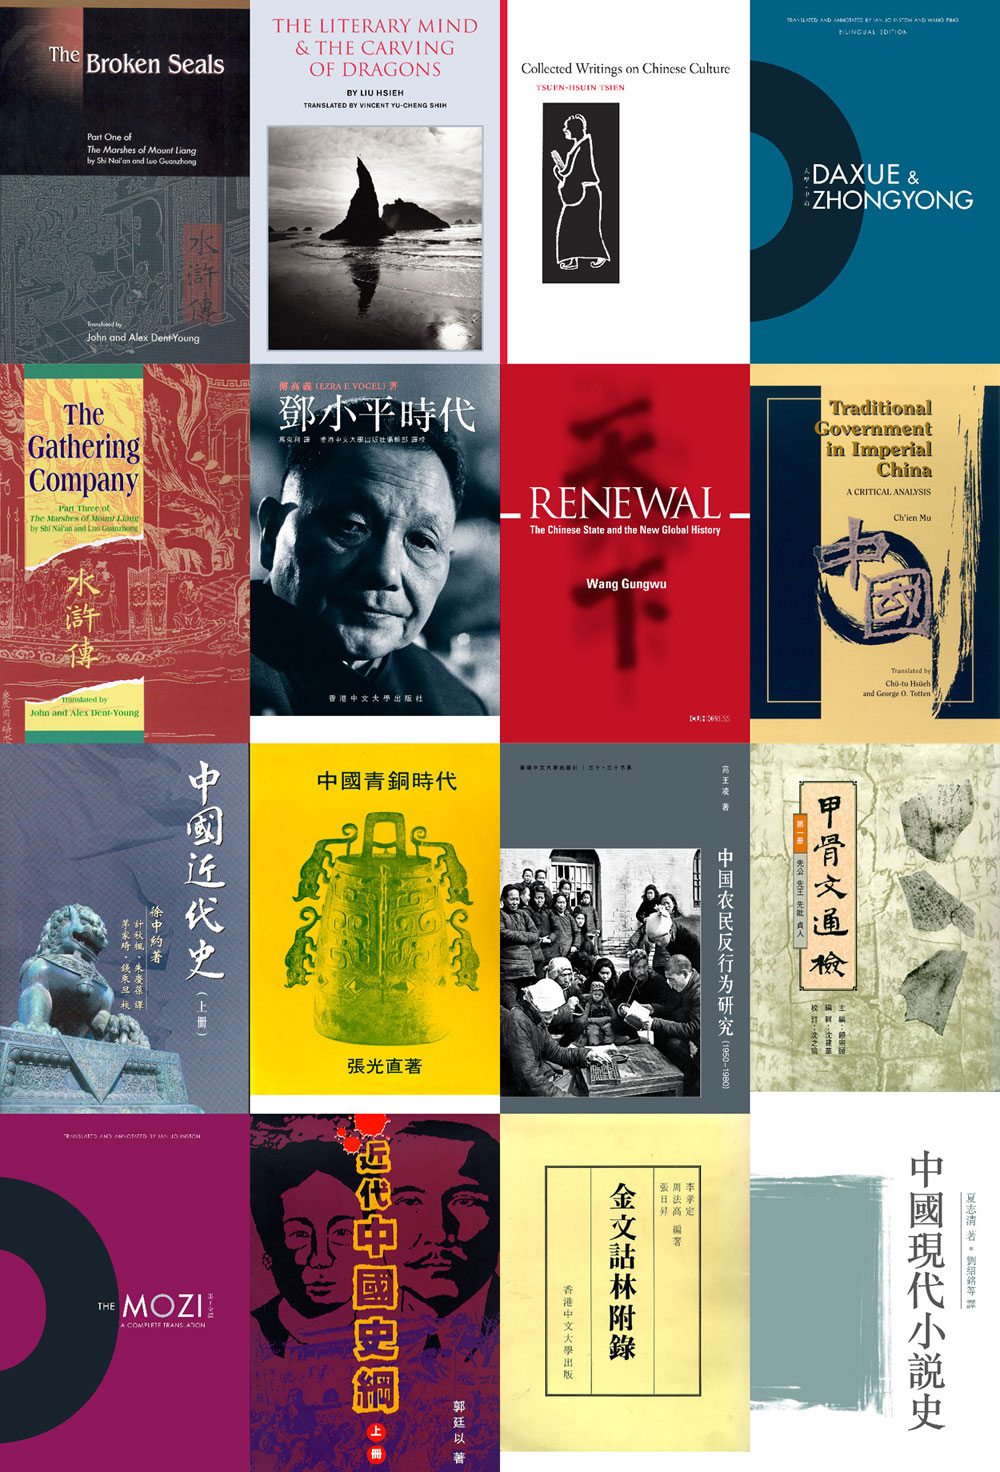 Publications of The Chinese University Press